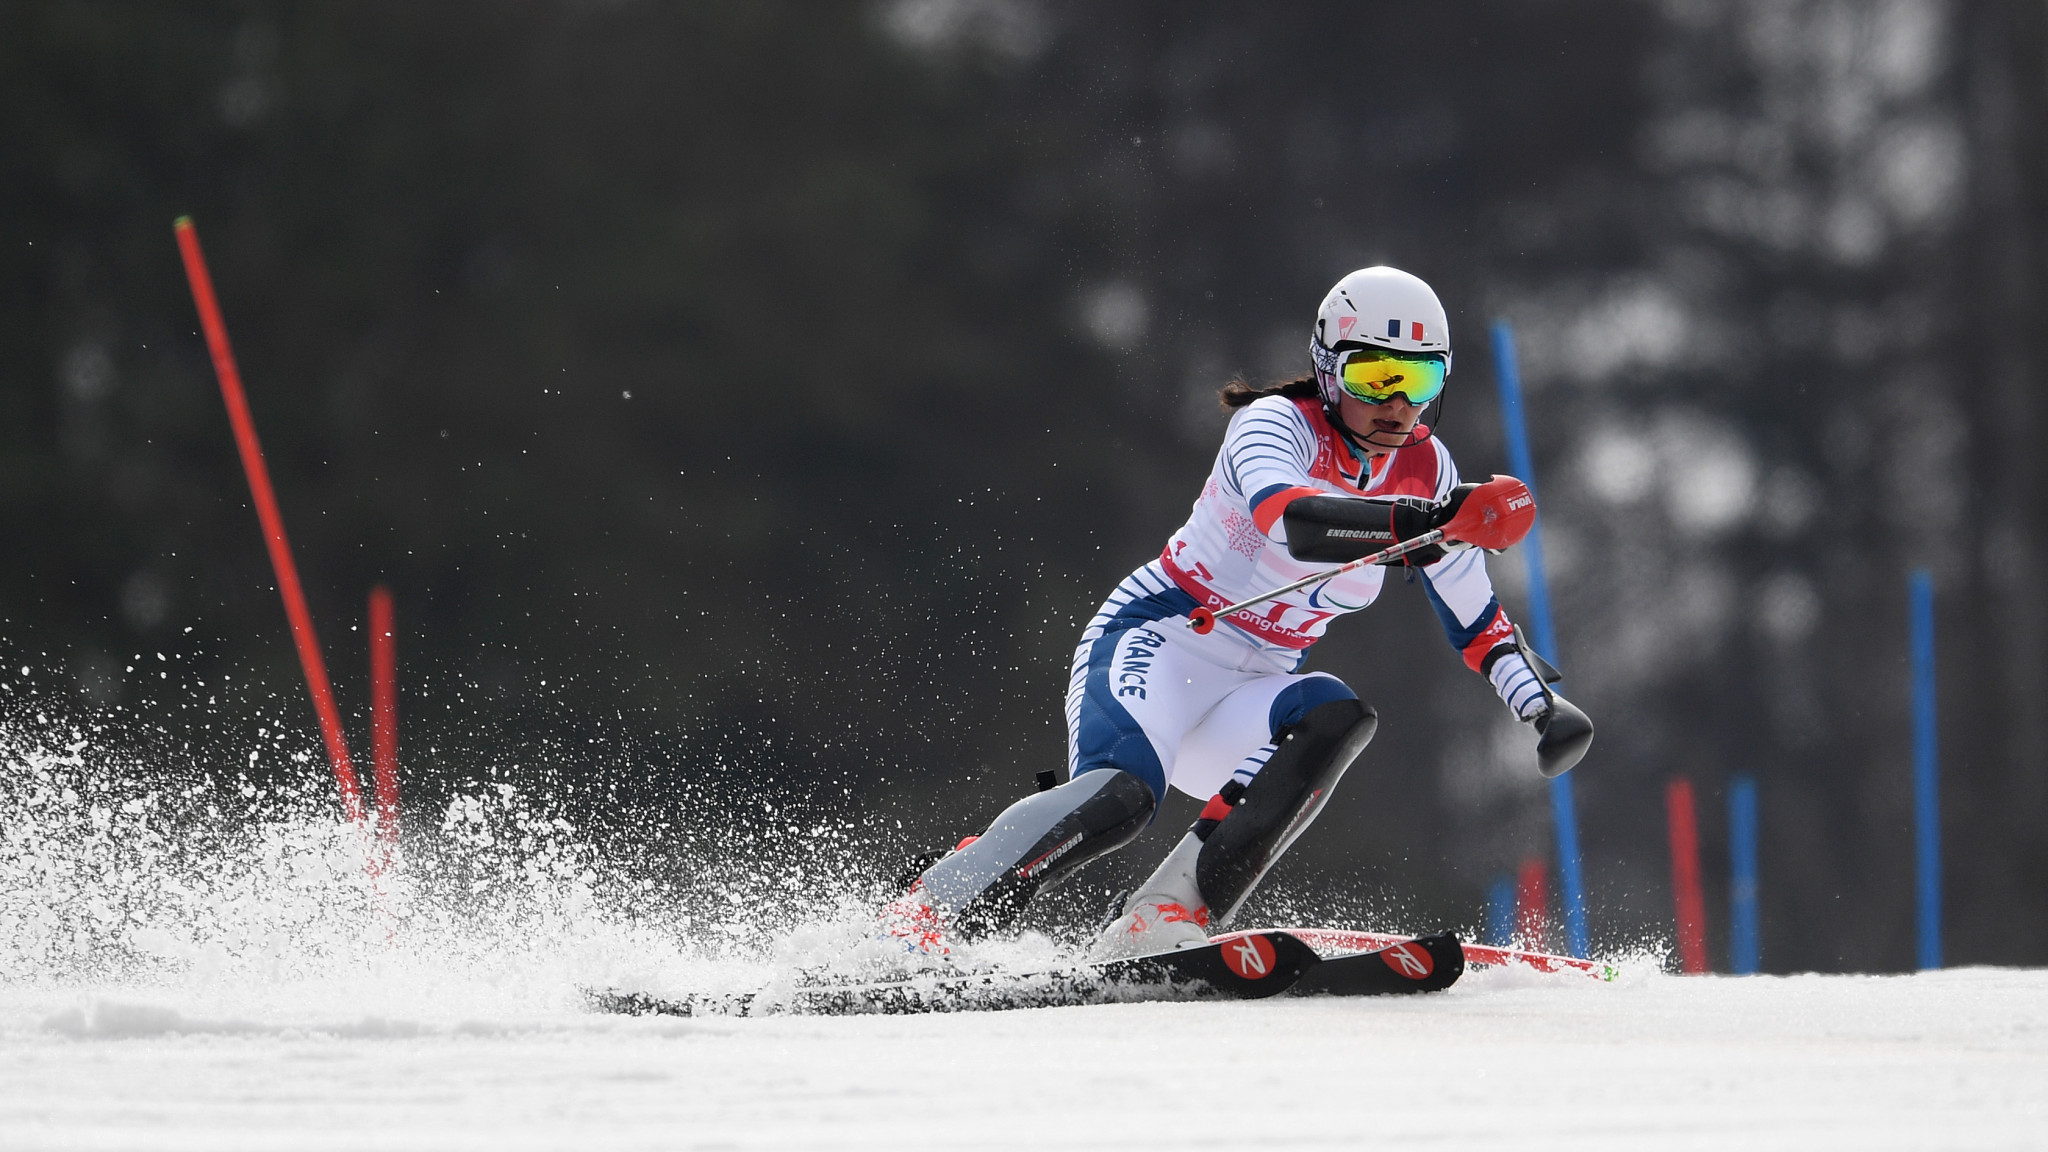 France's Marie Bochet made it 101 World Para Alpine Skiing World Cup wins at Steinach am Brenner ©Getty Images